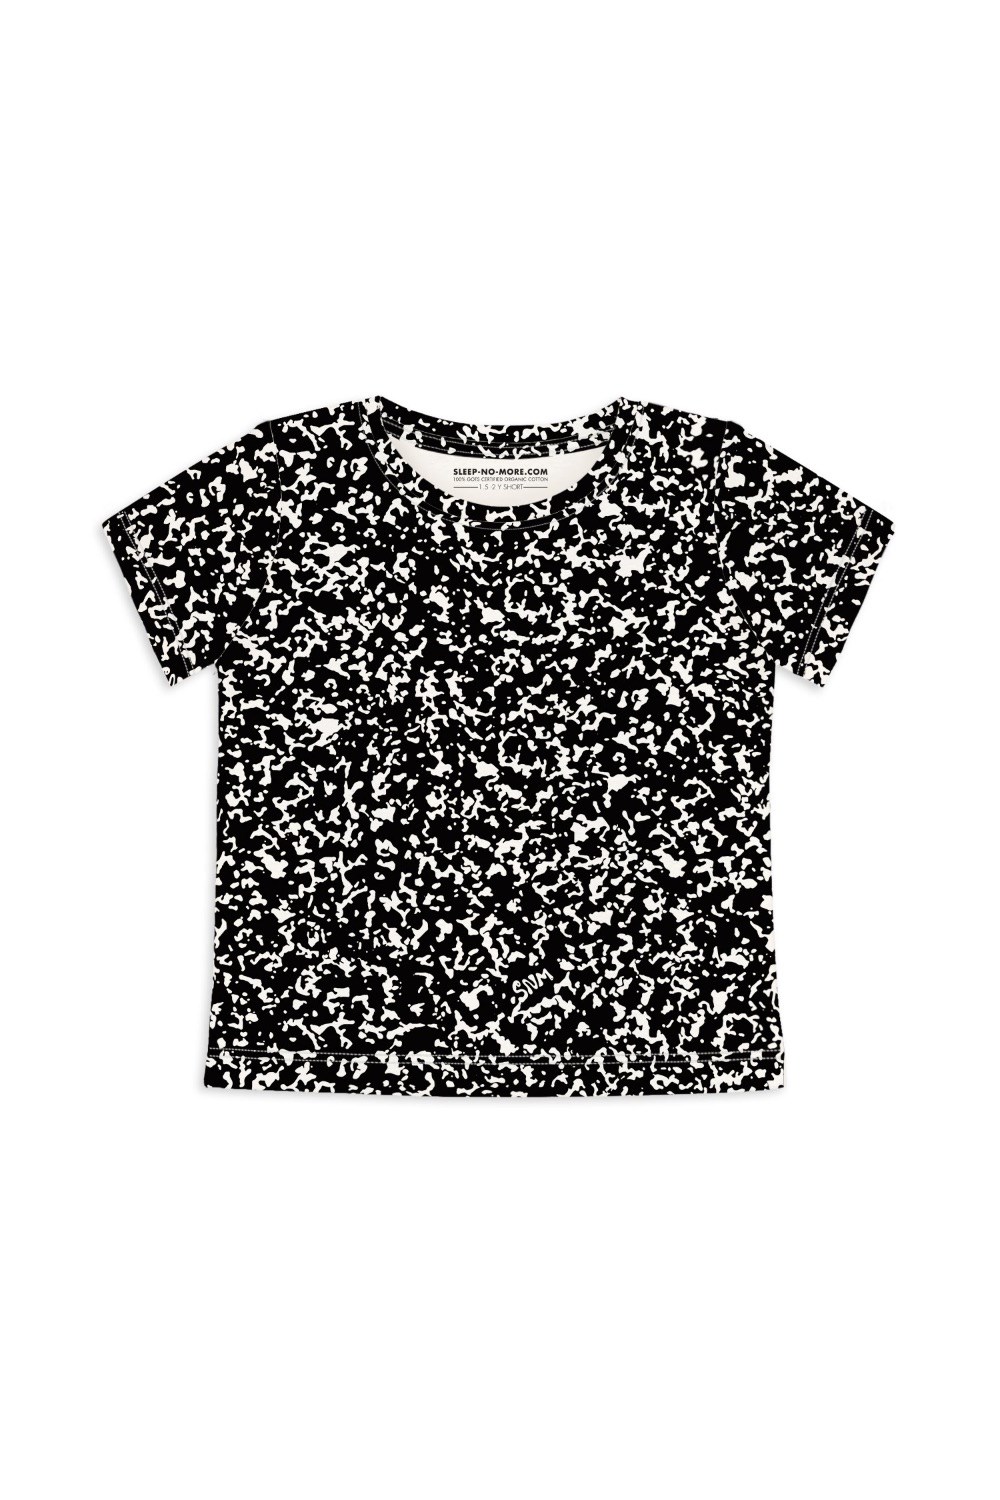 Too Cool For School Toddler T-Shirt -